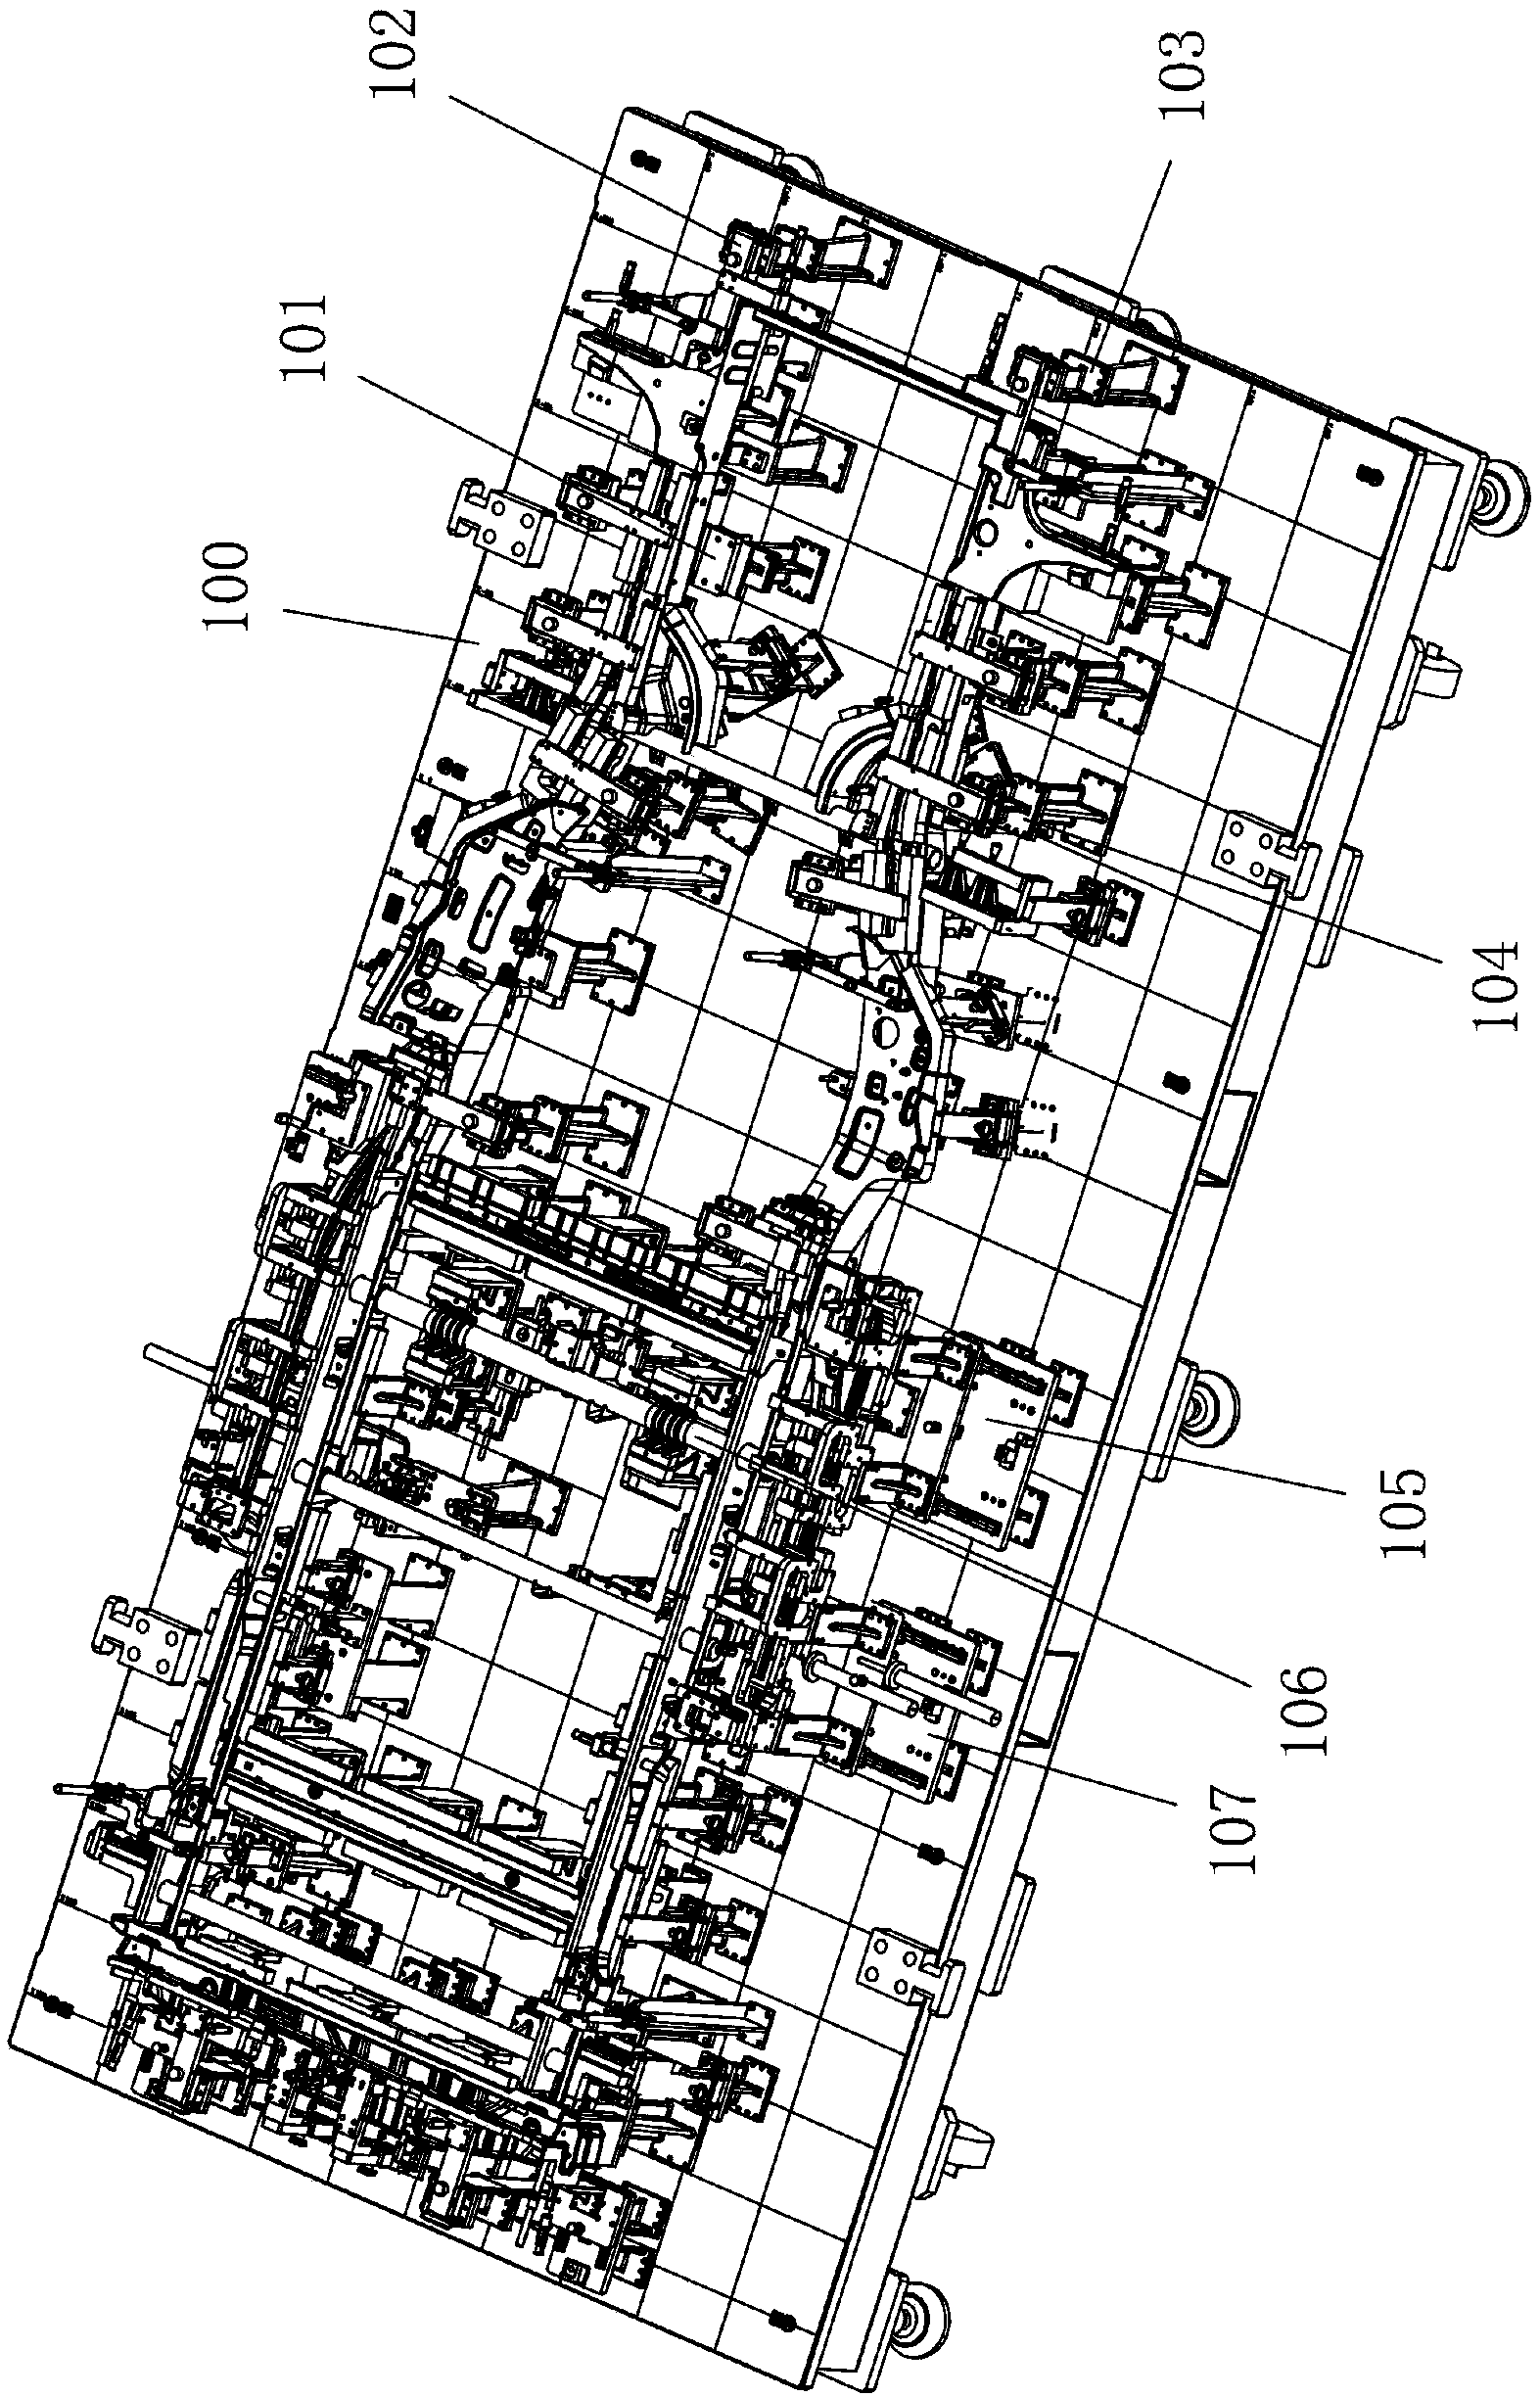 Building-block detecting tool special for detecting longitudinal beam assembly on bottom side of vehicle